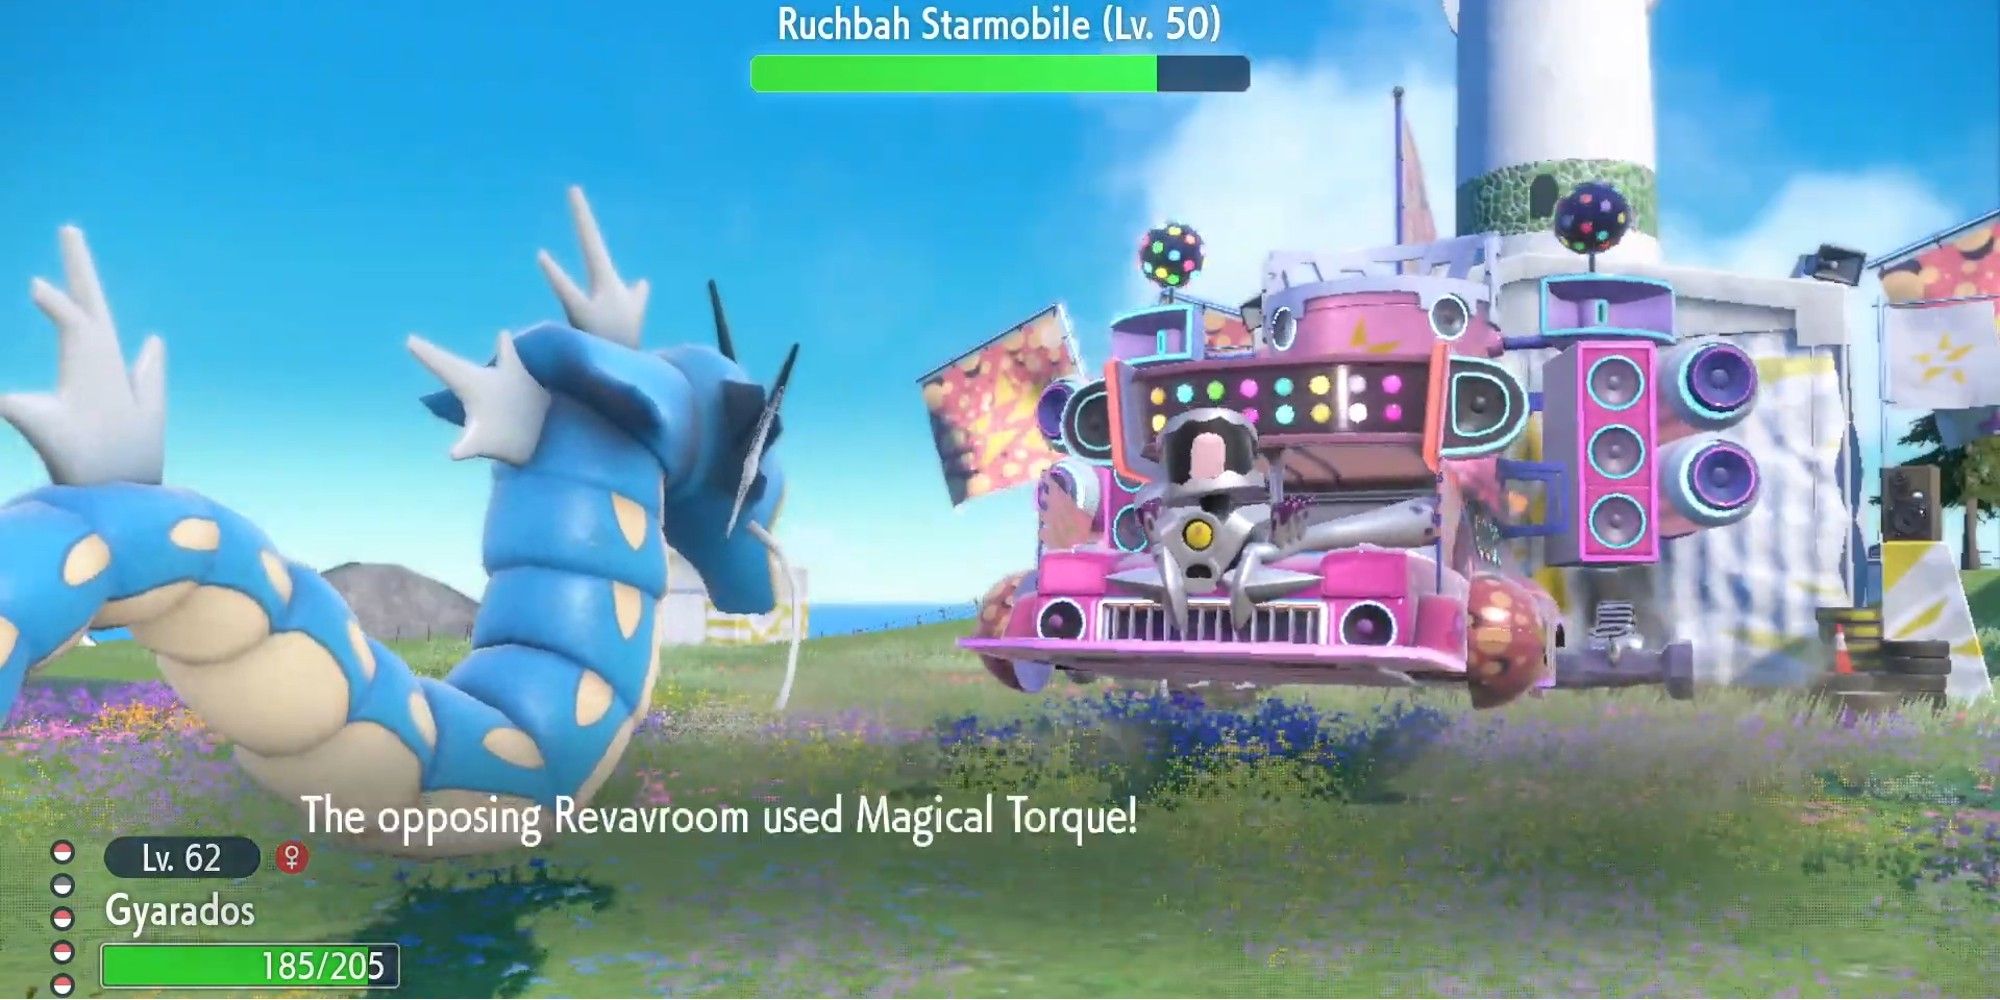 Magical Torque being used by Ruchbah Starmobile against Gyarados in Pokemon Scarlet and Violet